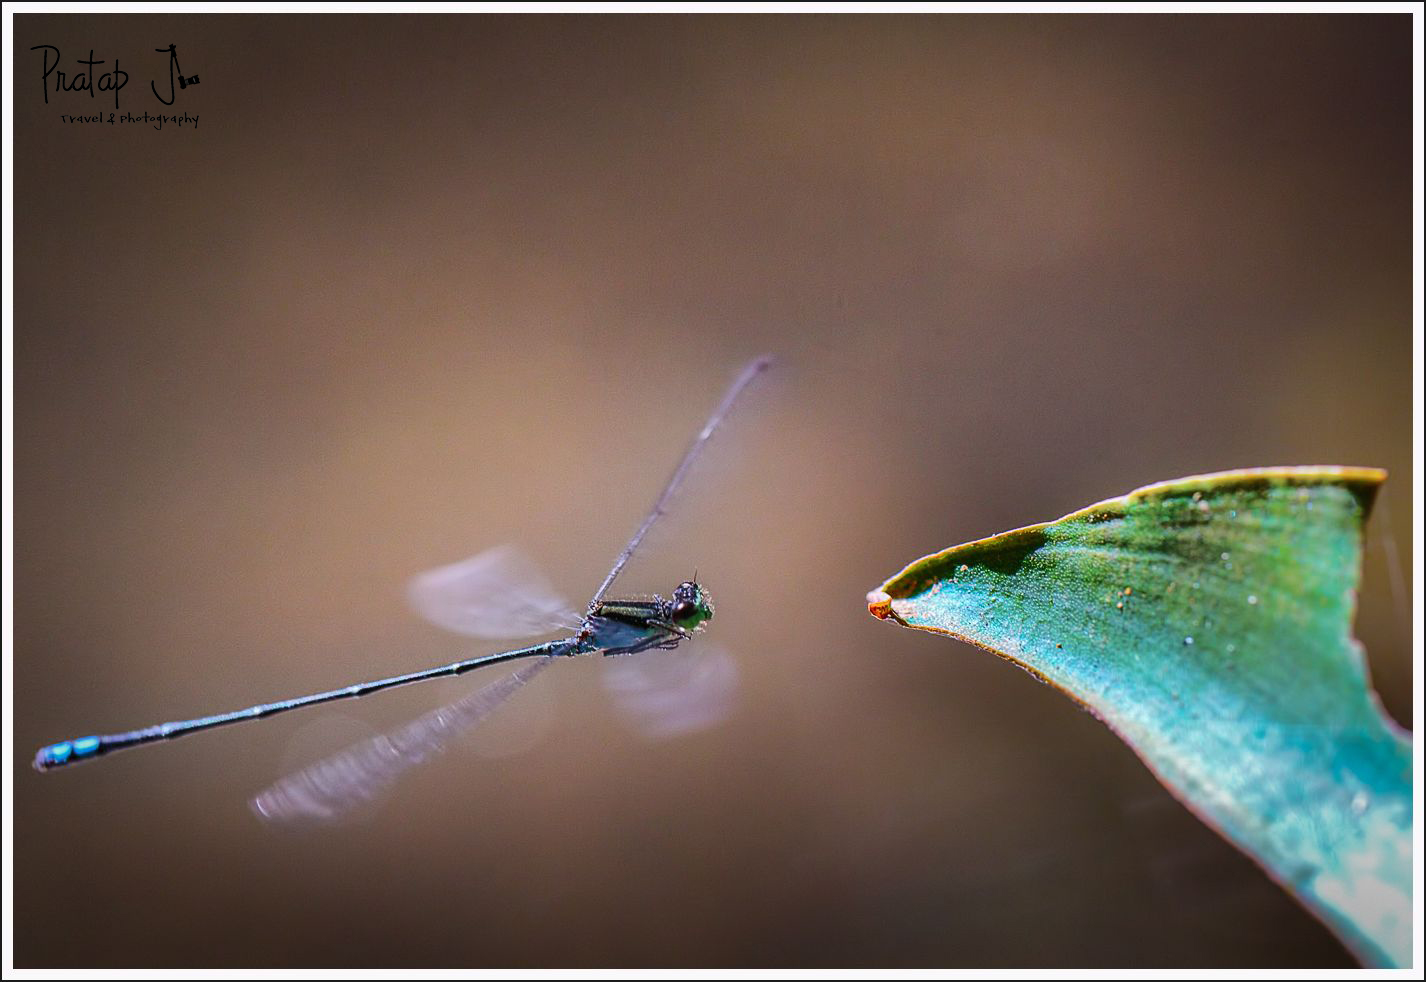 High ISO shot of a damselfly hovering